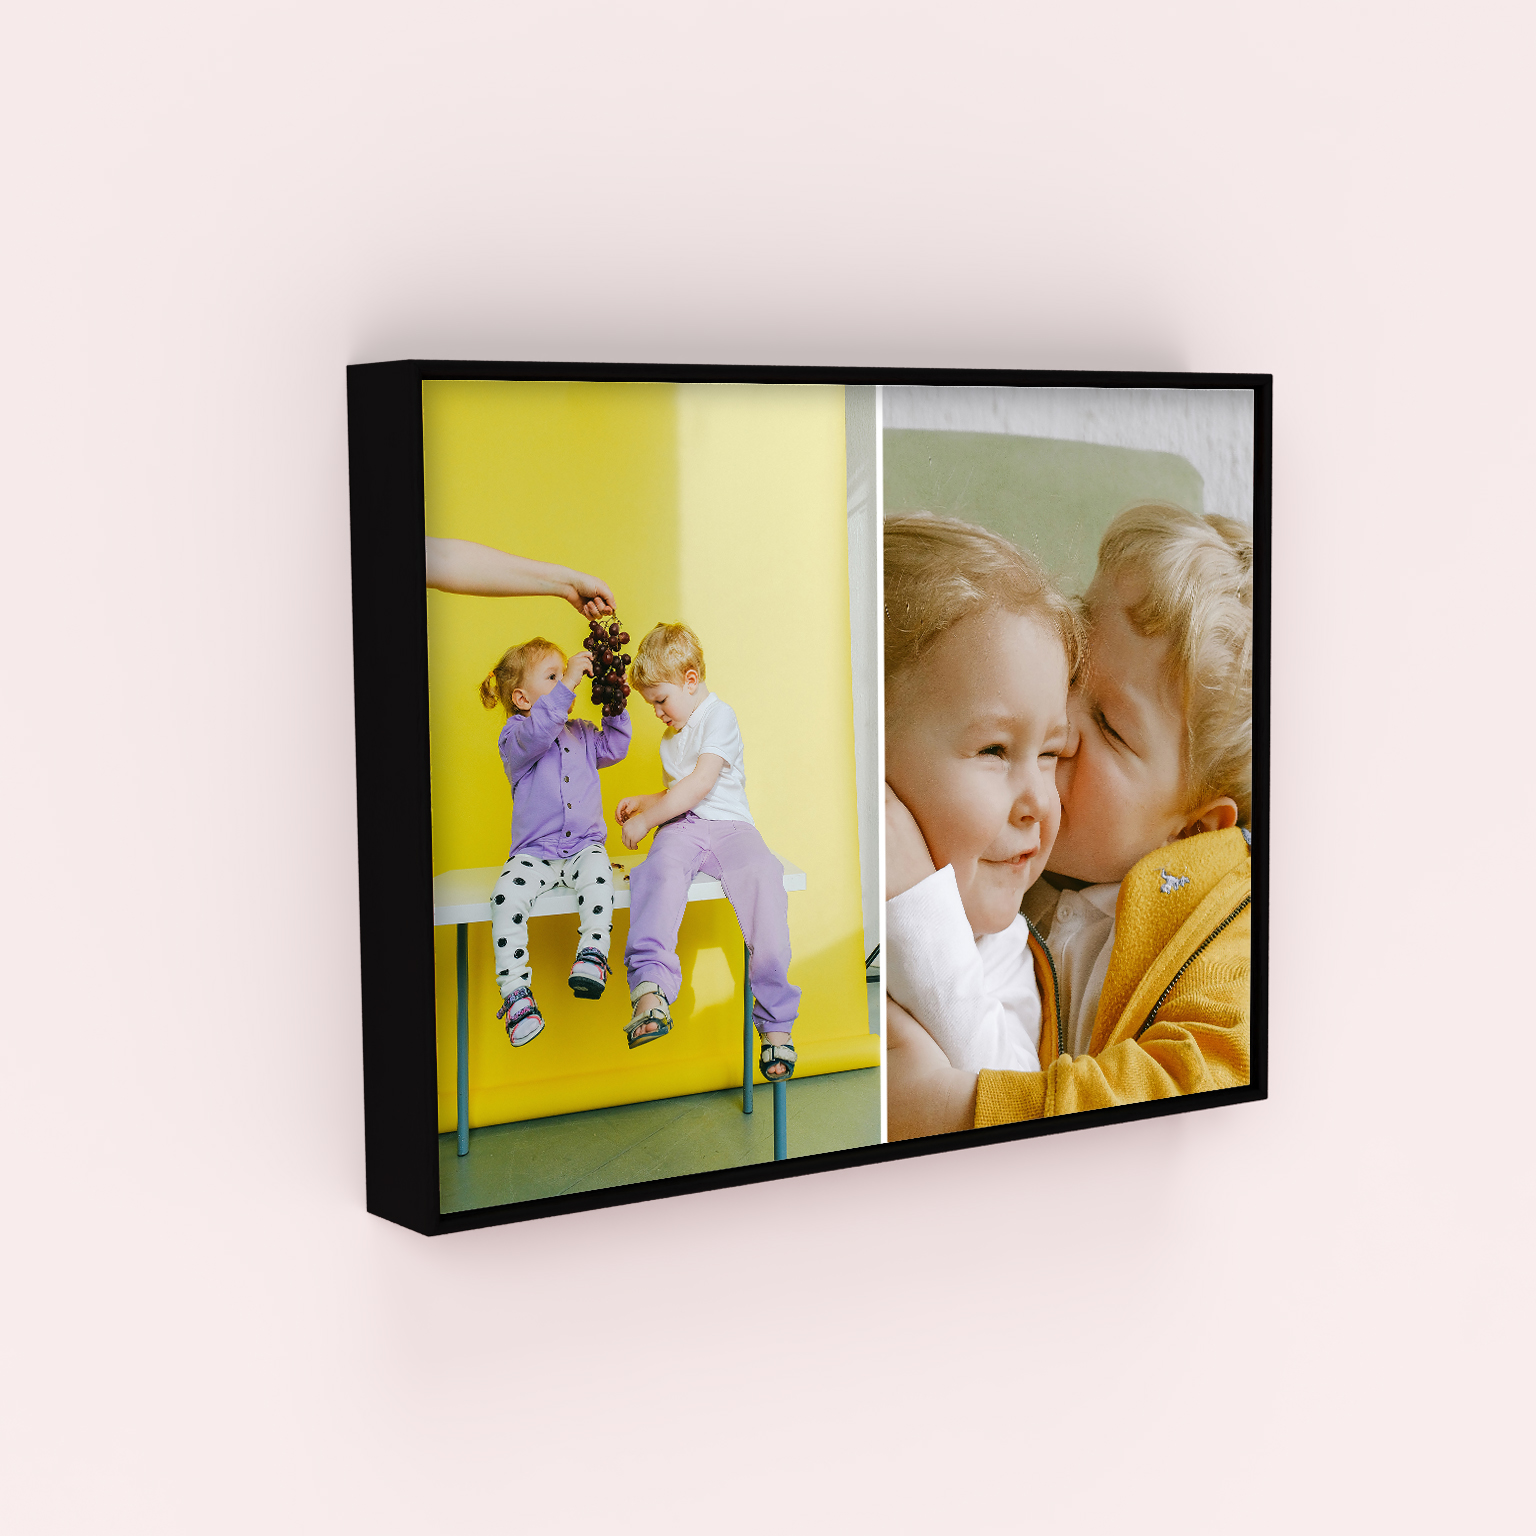 Double Trouble Box Framed Prints - A Sophisticated Gift Featuring Two Treasured Photos